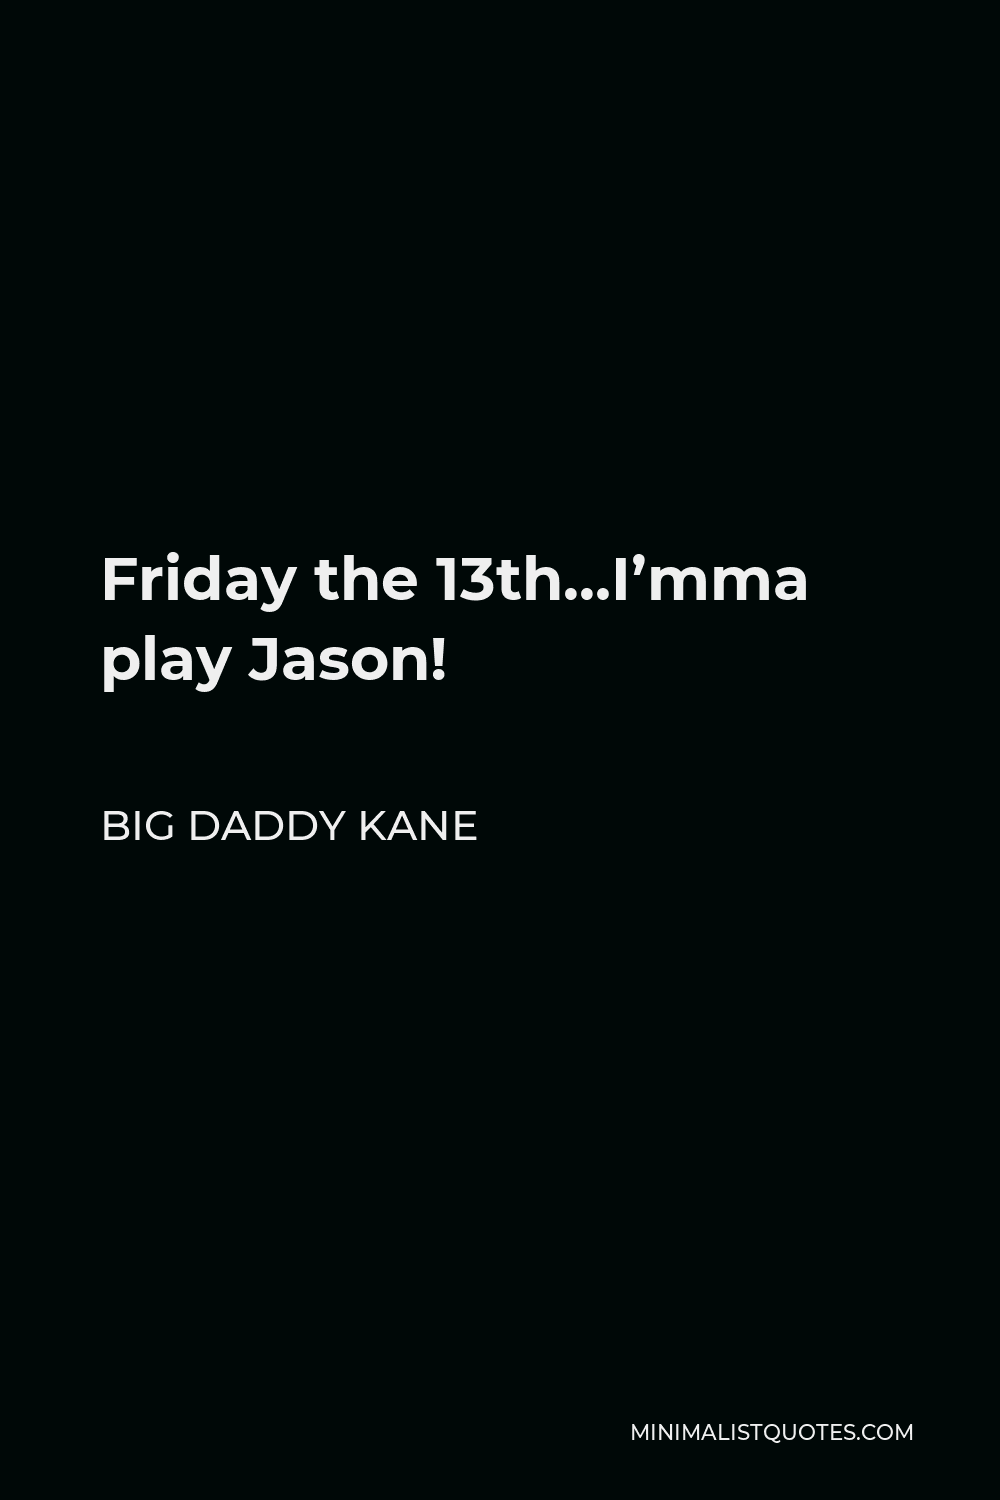 Big Daddy Kane Quote - Friday the 13th…I’mma play Jason!